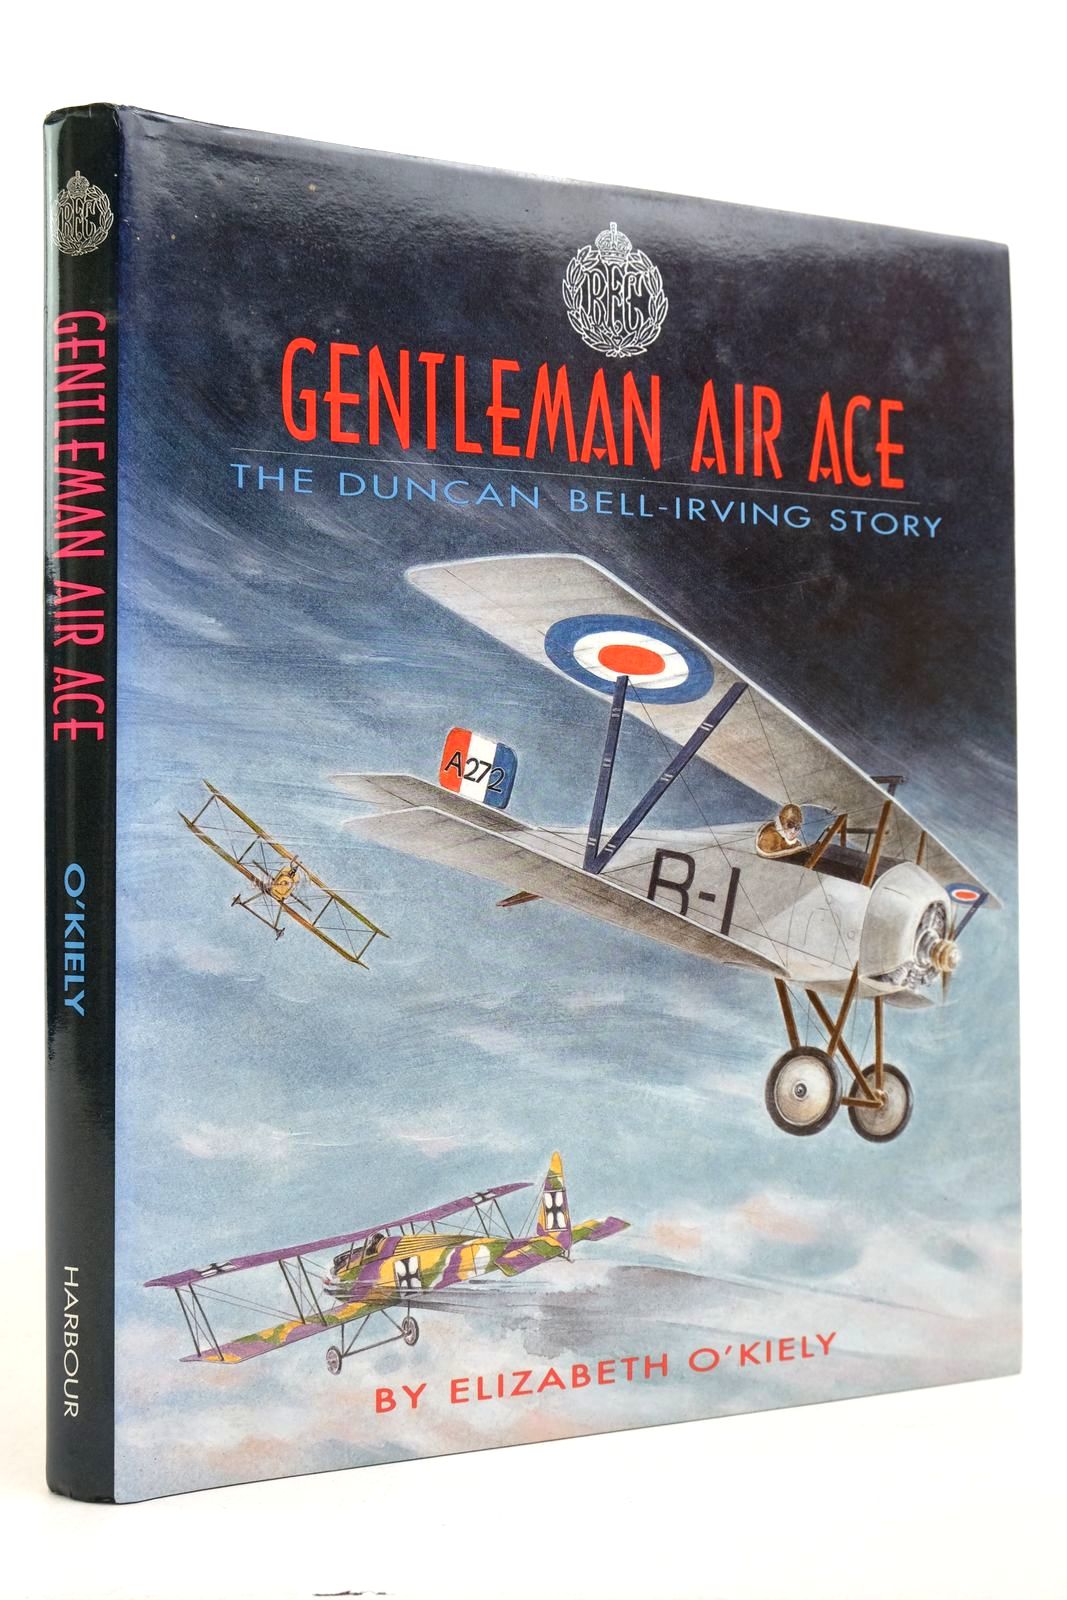 Photo of GENTLEMAN AIR ACE: THE DUNCAN BELL-IRVING STORY written by O'Kiely, Elizabeth published by Harbour Publishing (STOCK CODE: 2139947)  for sale by Stella & Rose's Books